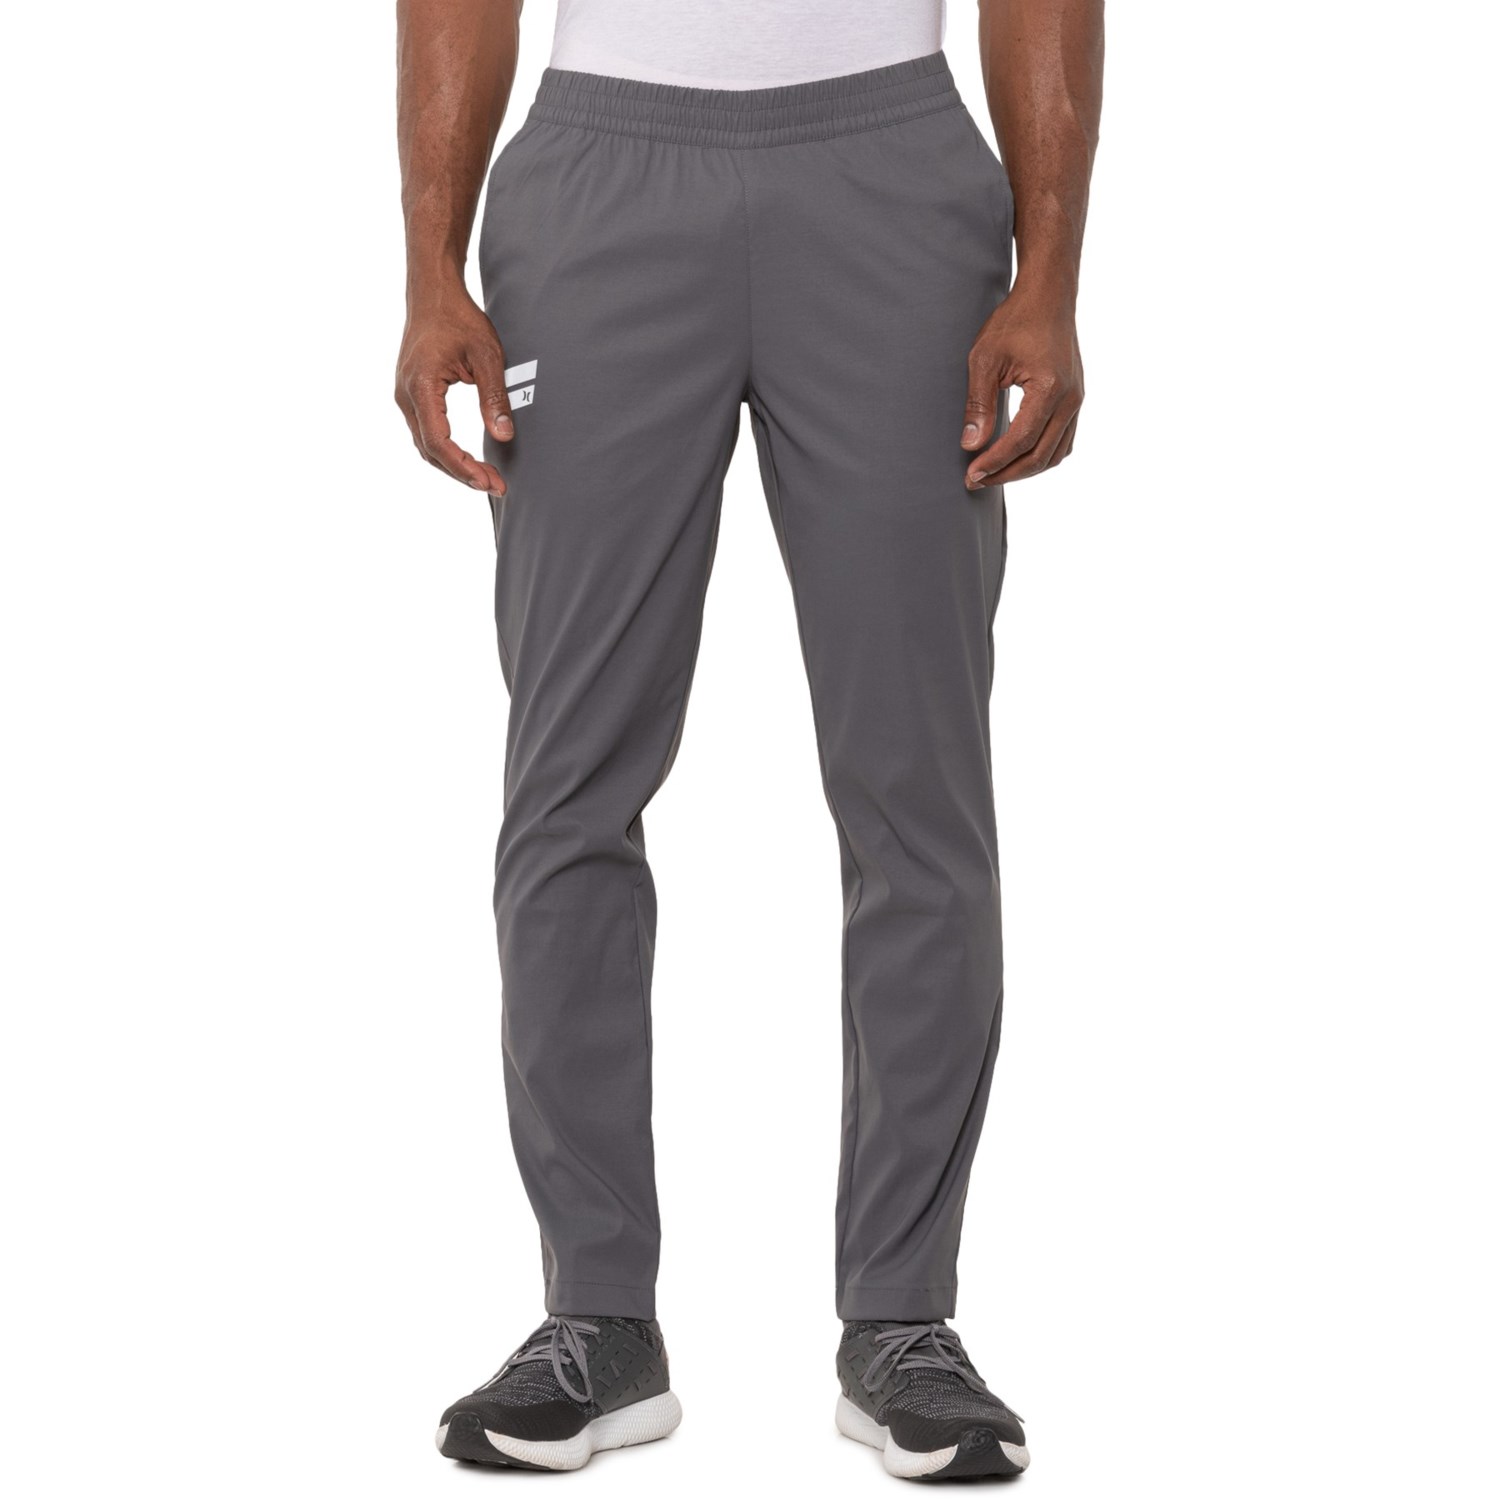 Hurley Exist Tapered Pants (For Men) - Save 40%